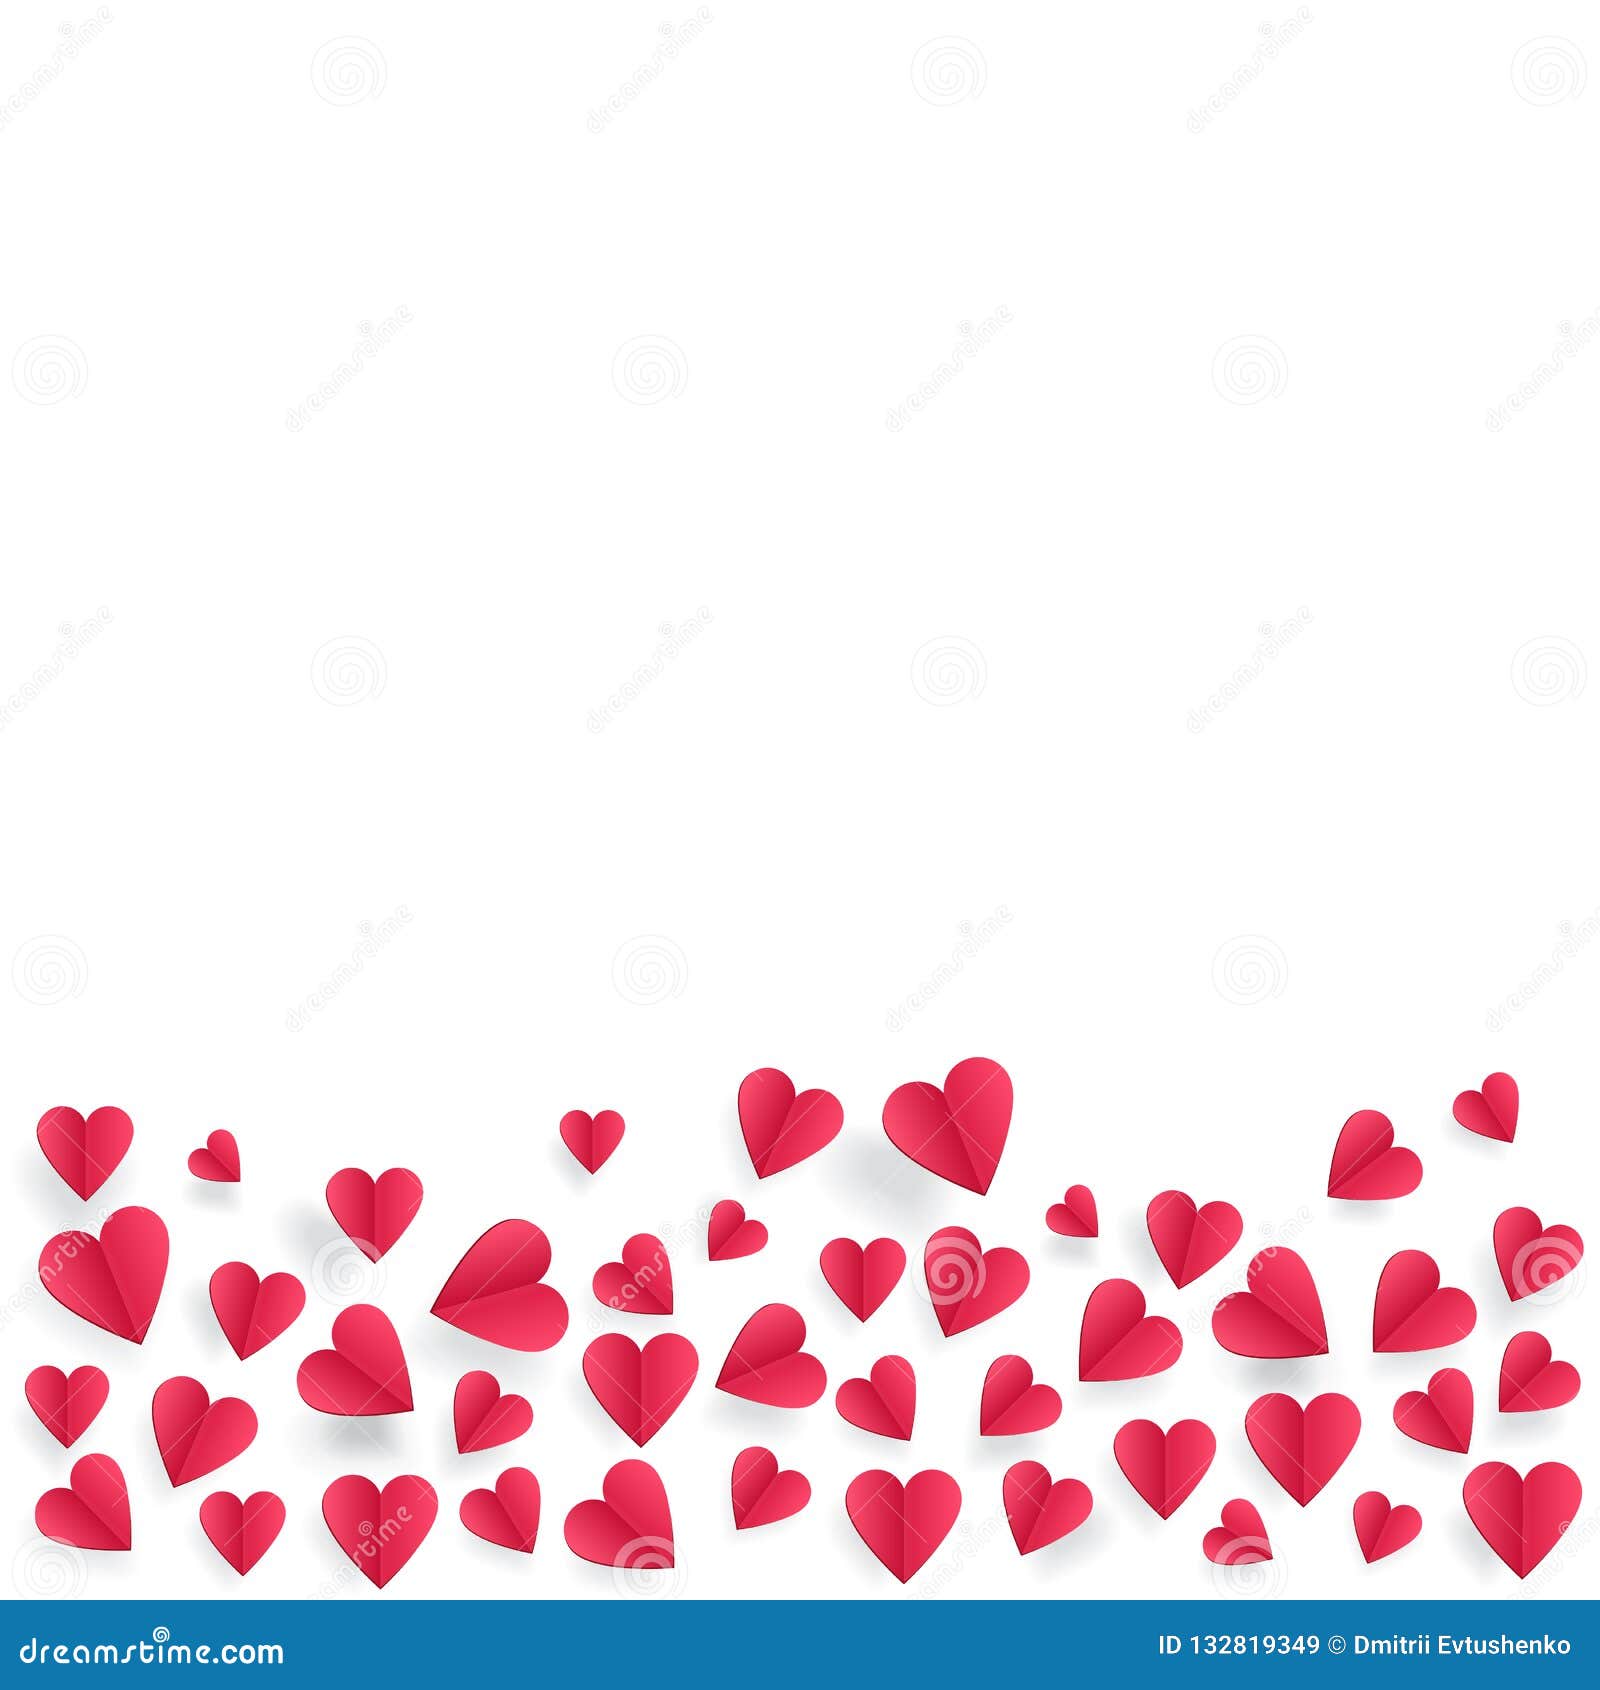 Hearts On Abstract Love Background With Paper Cut Hearts 